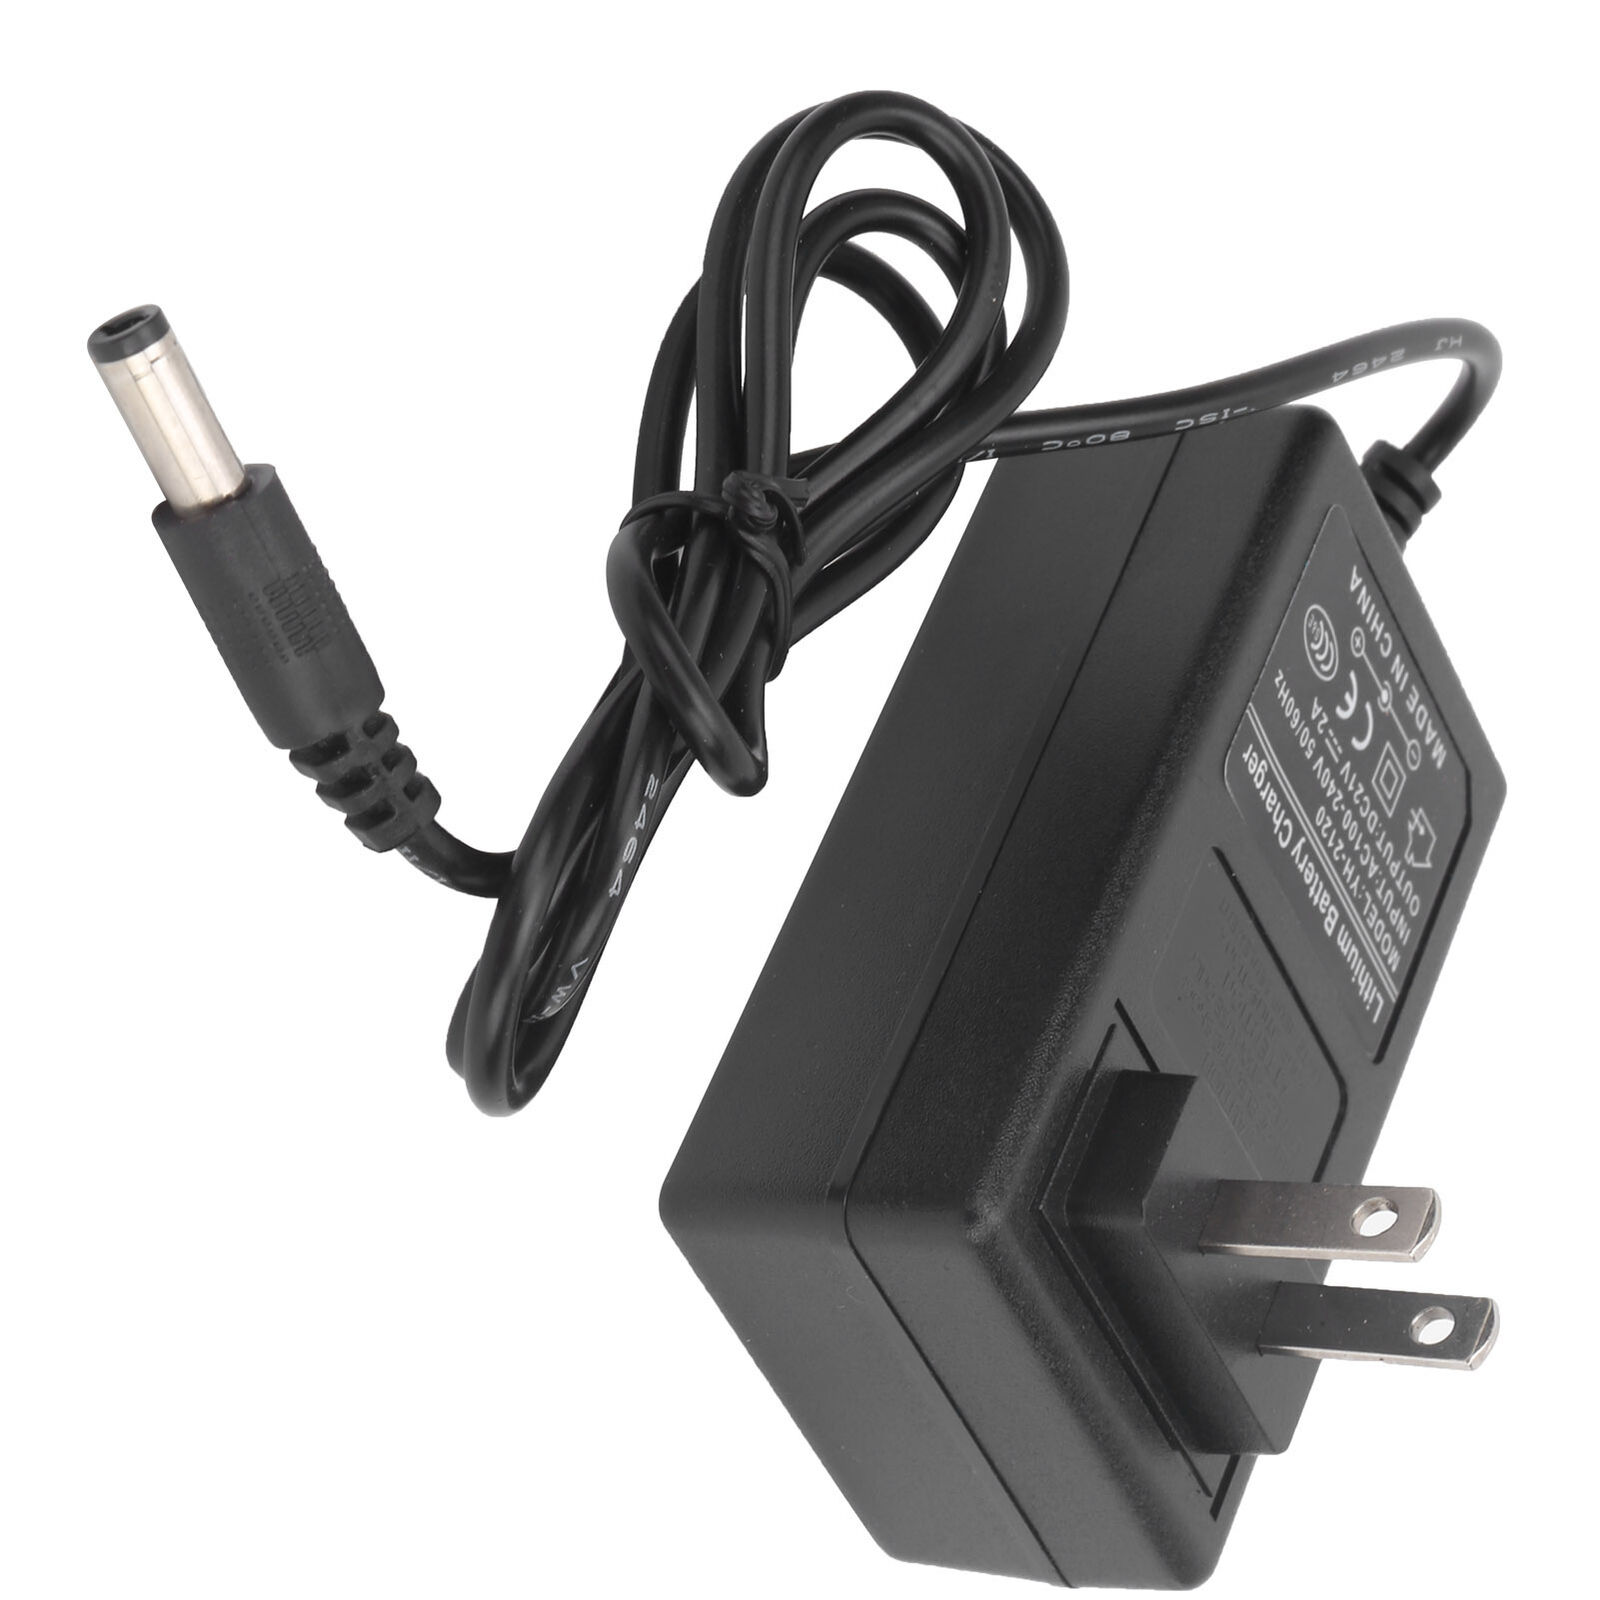 Adapter Charger For Arcade1up Game Machines Arcade 1up Fits ALL Riser Power Cord Brand Unbranded Compatible Brand Unive